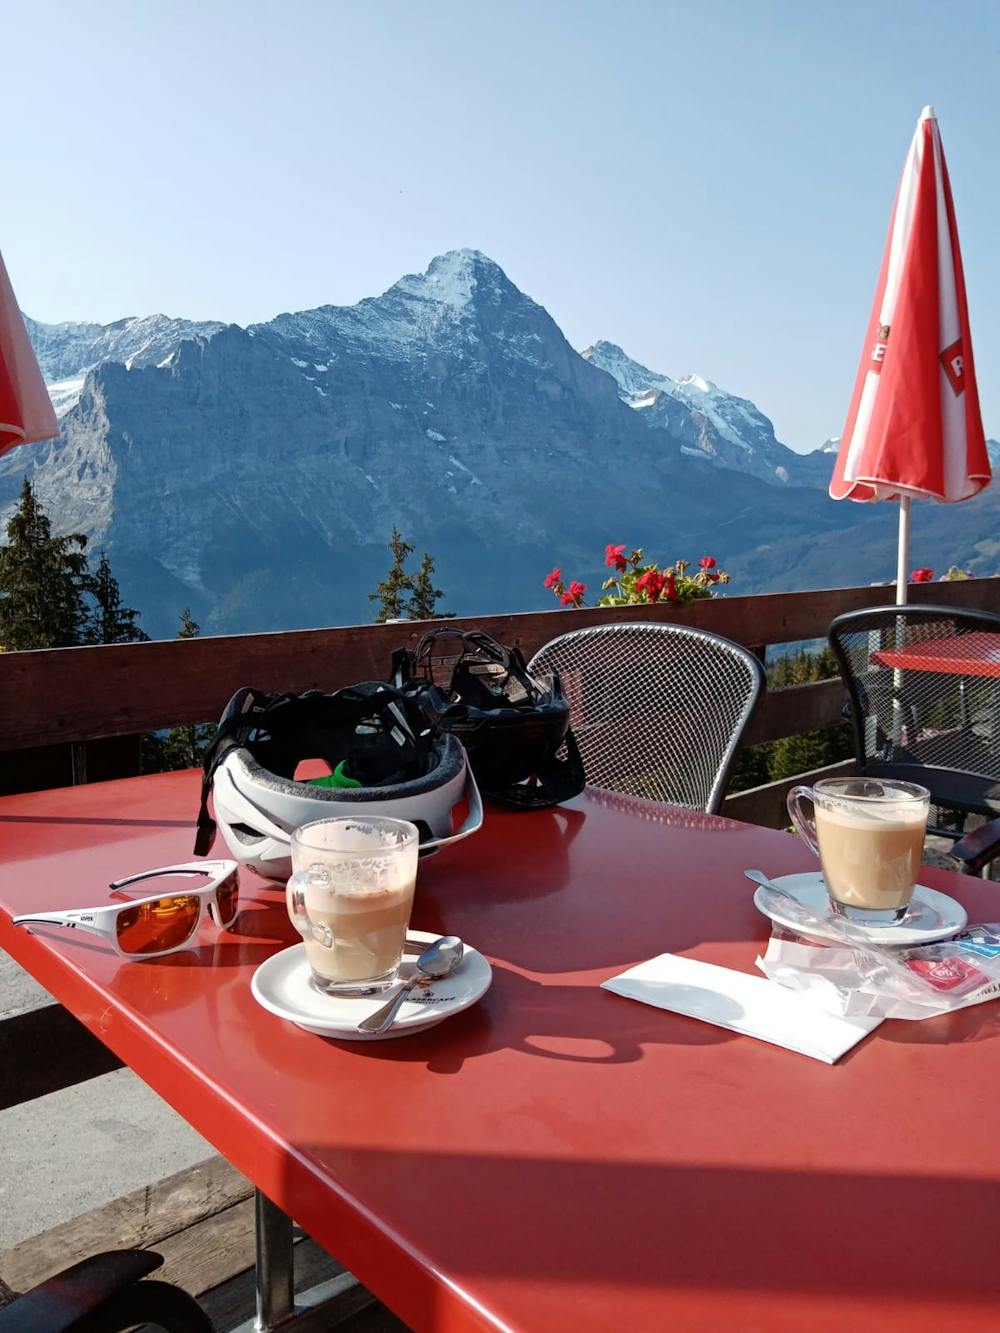 A quick coffee at the Berggasthaus Wildspitz with the Eiger north face dominating the view.